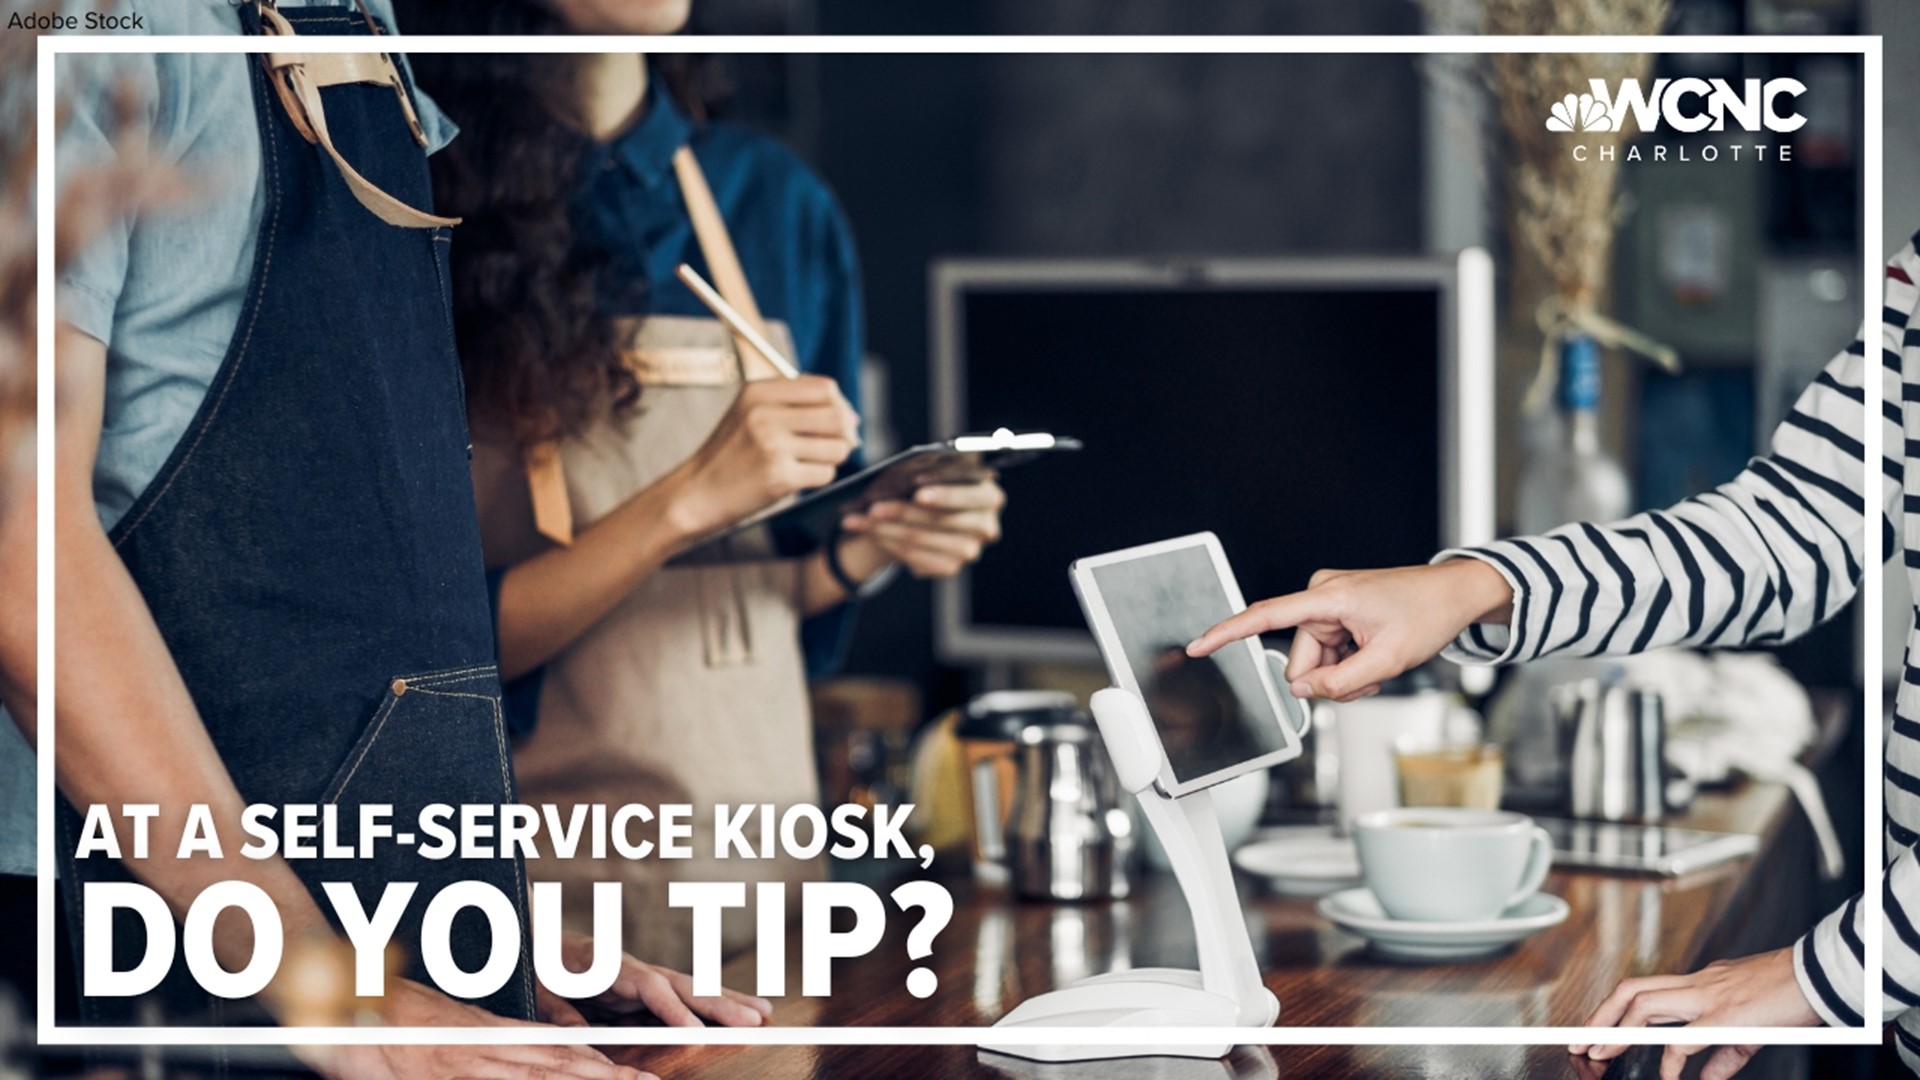 Prompts at self-service kiosks to tip are causing some to ask, "When am I supposed to tip?"